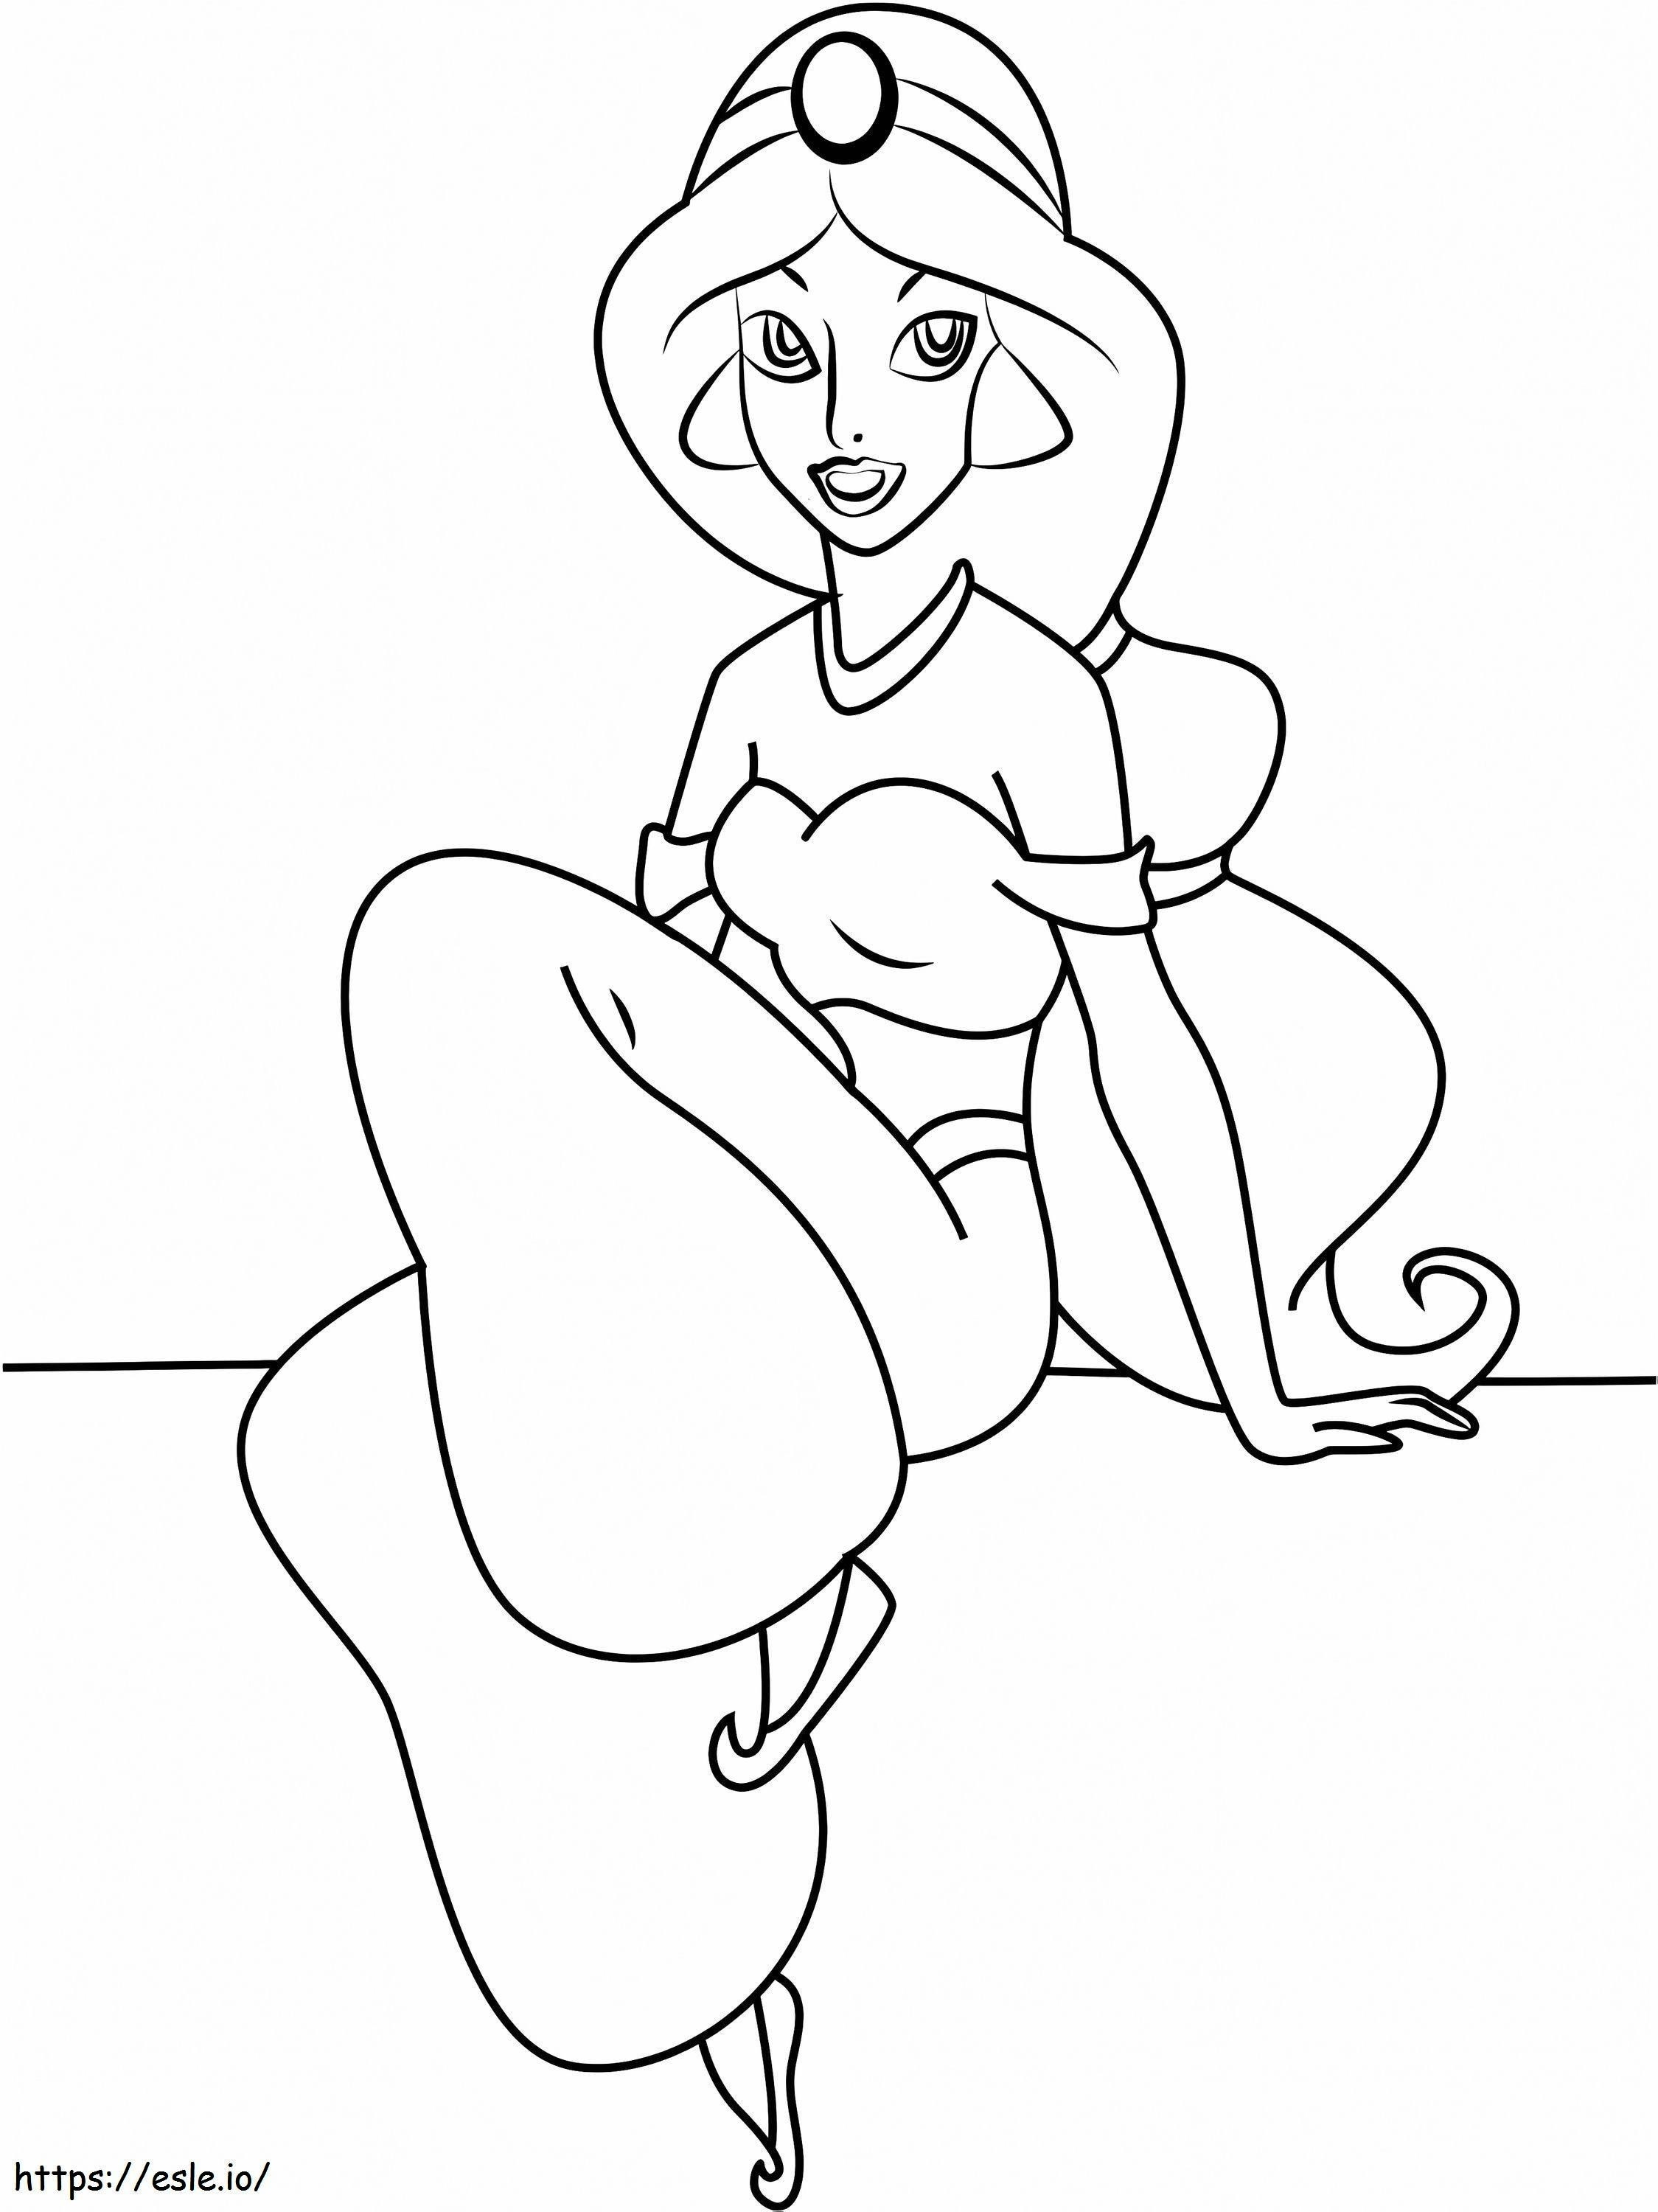 1532485455 Jasmine Sitting A4 coloring page